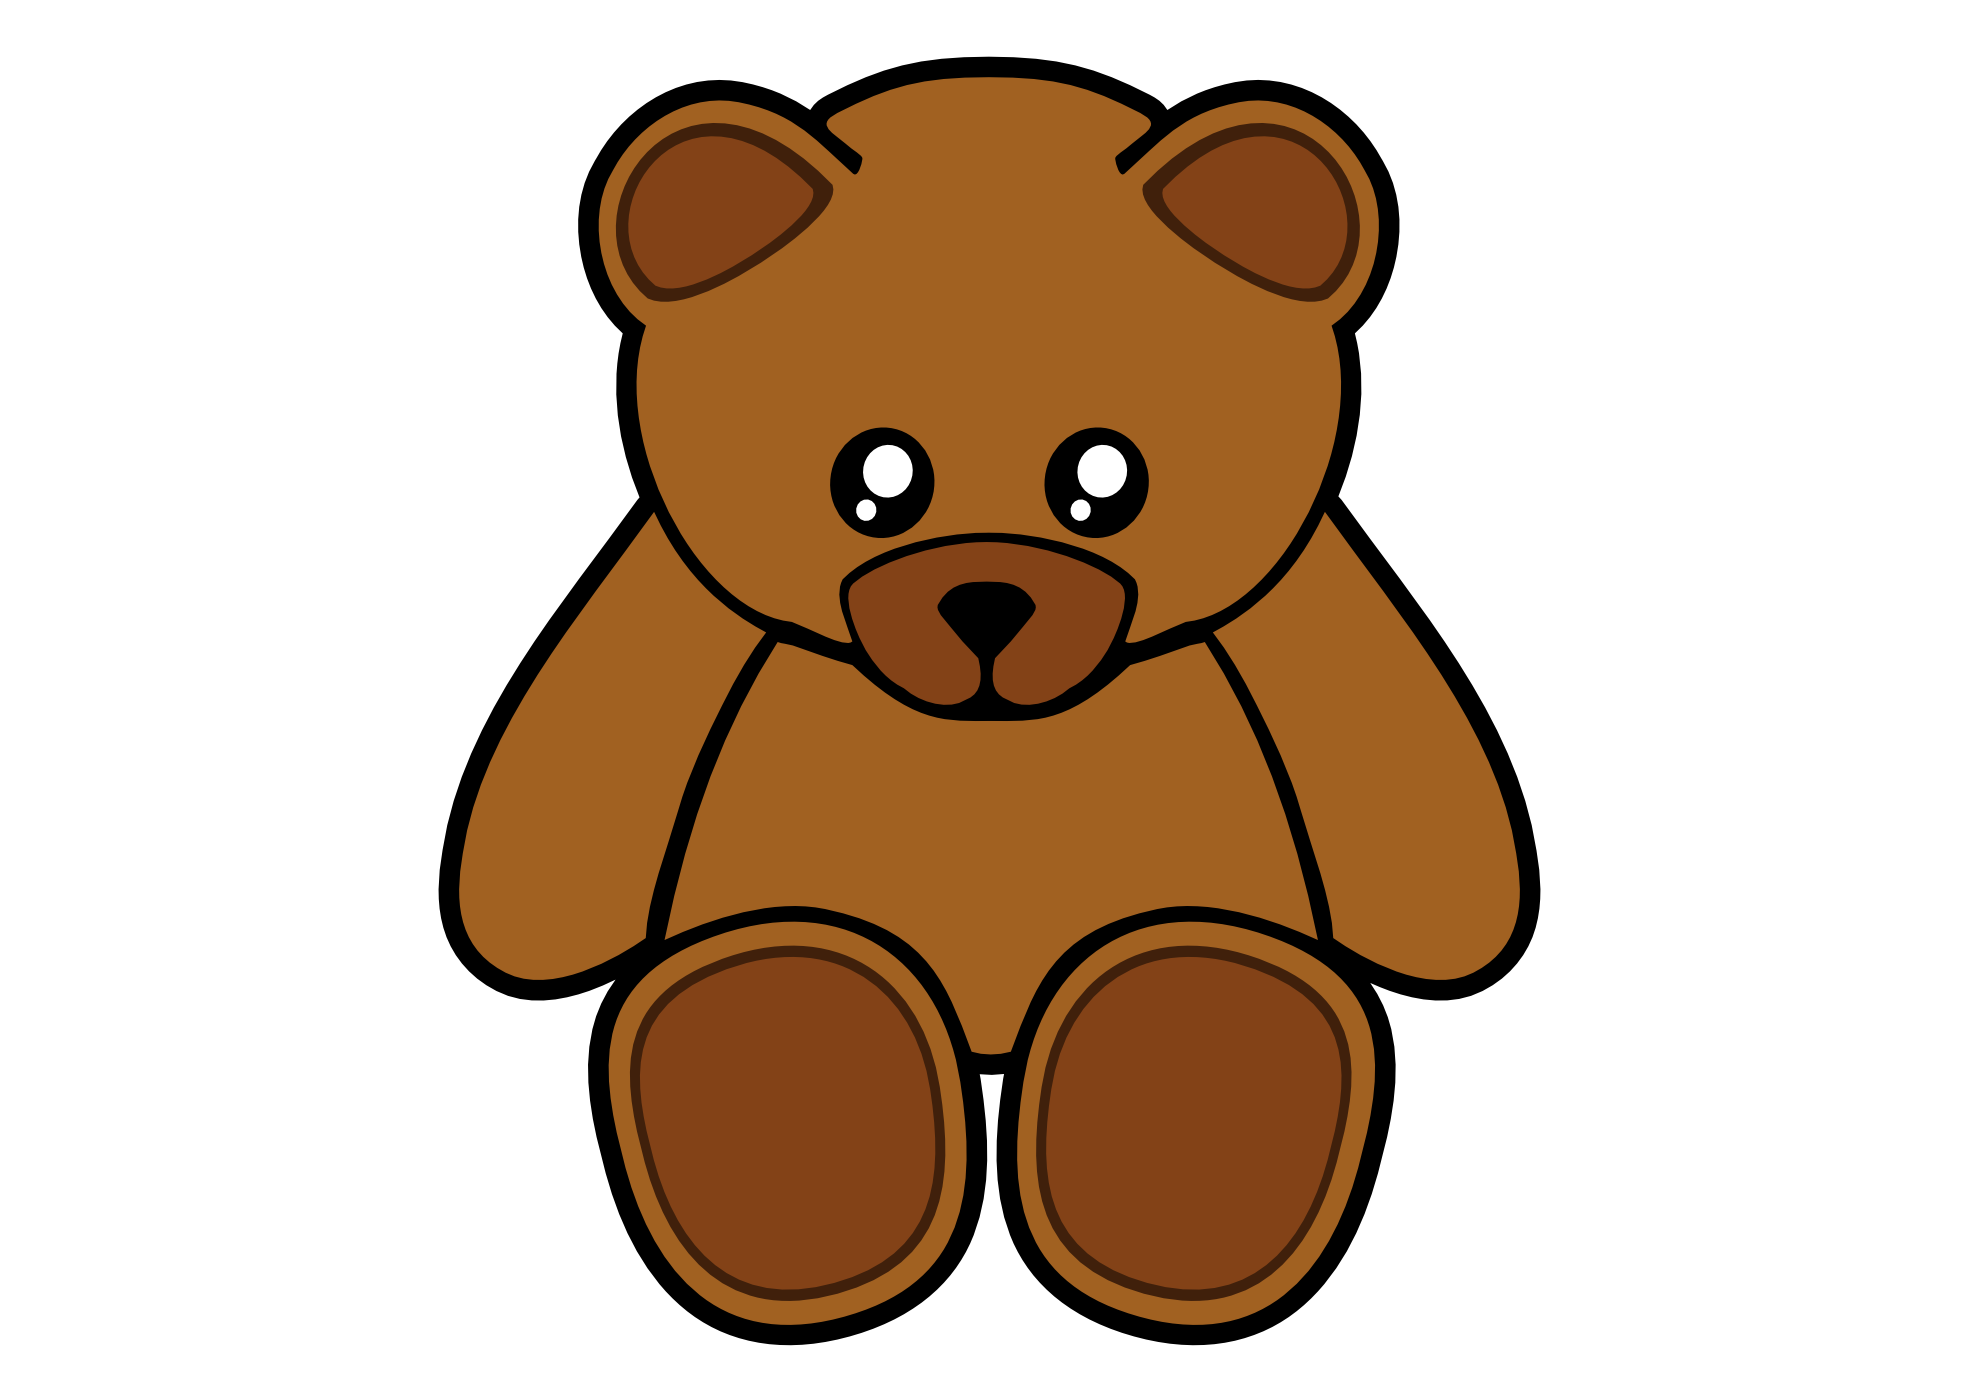 Teddy bear clipart free clipart images 11